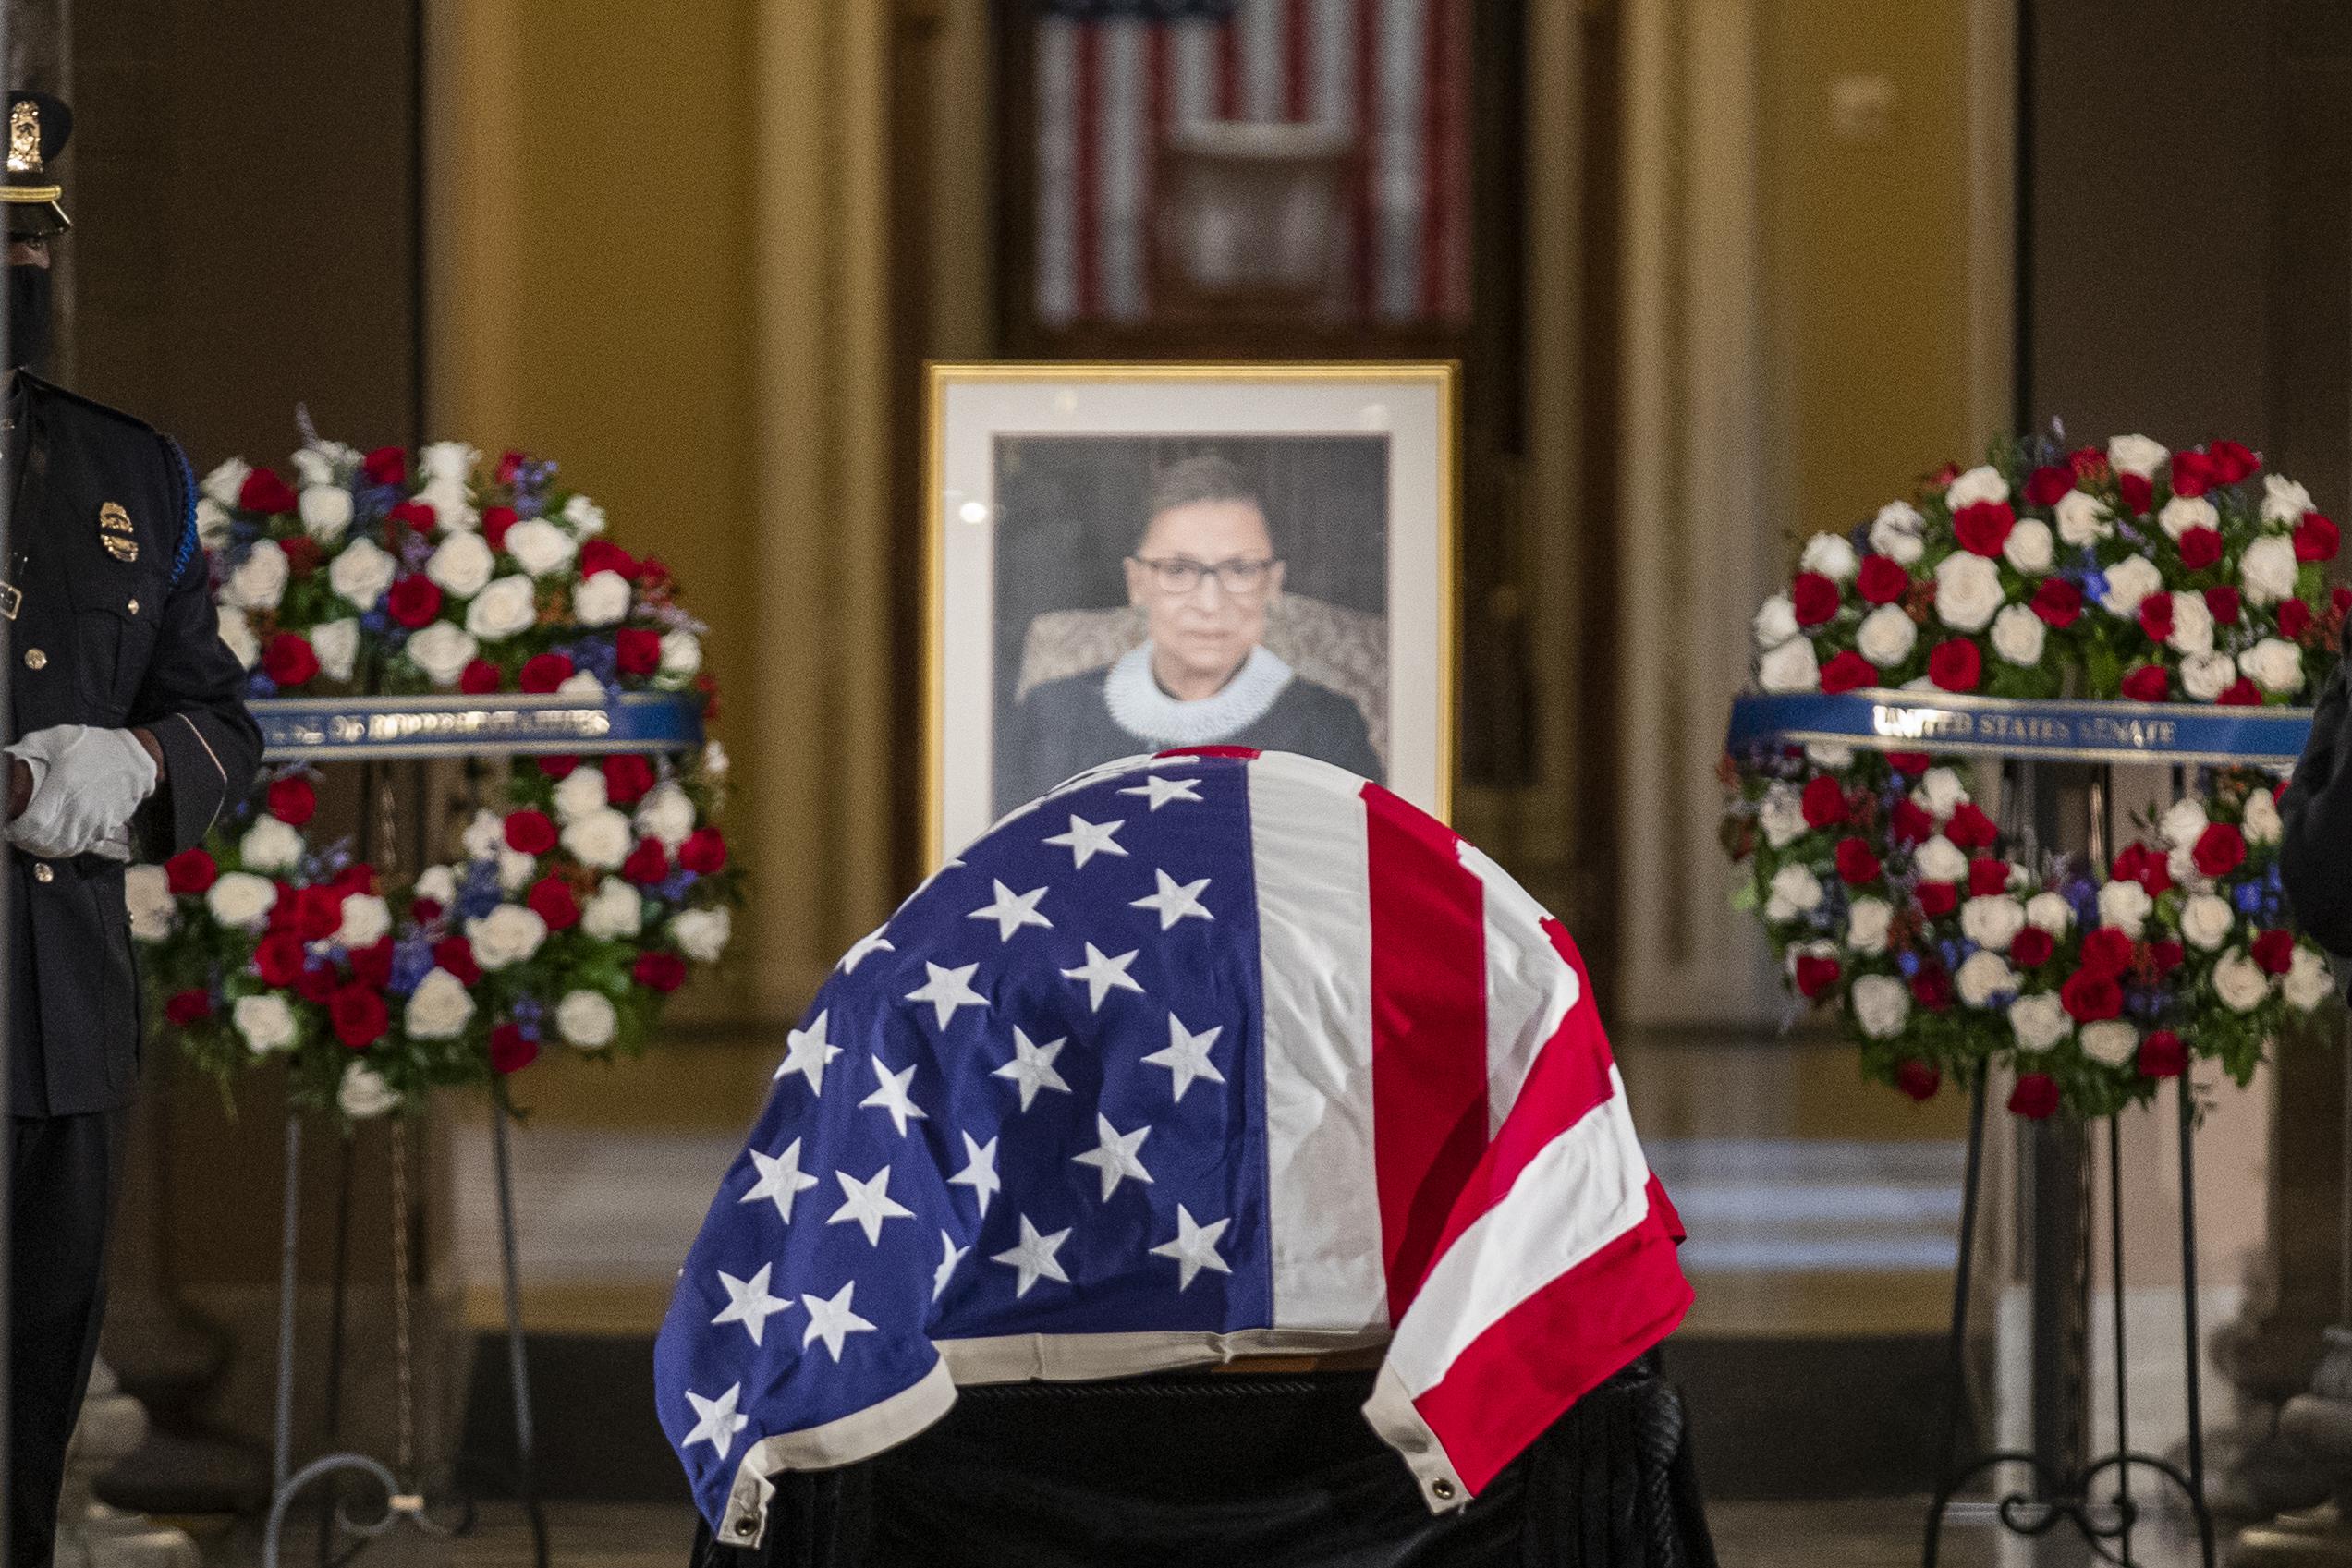 RBG's casket draped in an American flag in front of Ginsburg's portrait flanked by two wreaths.